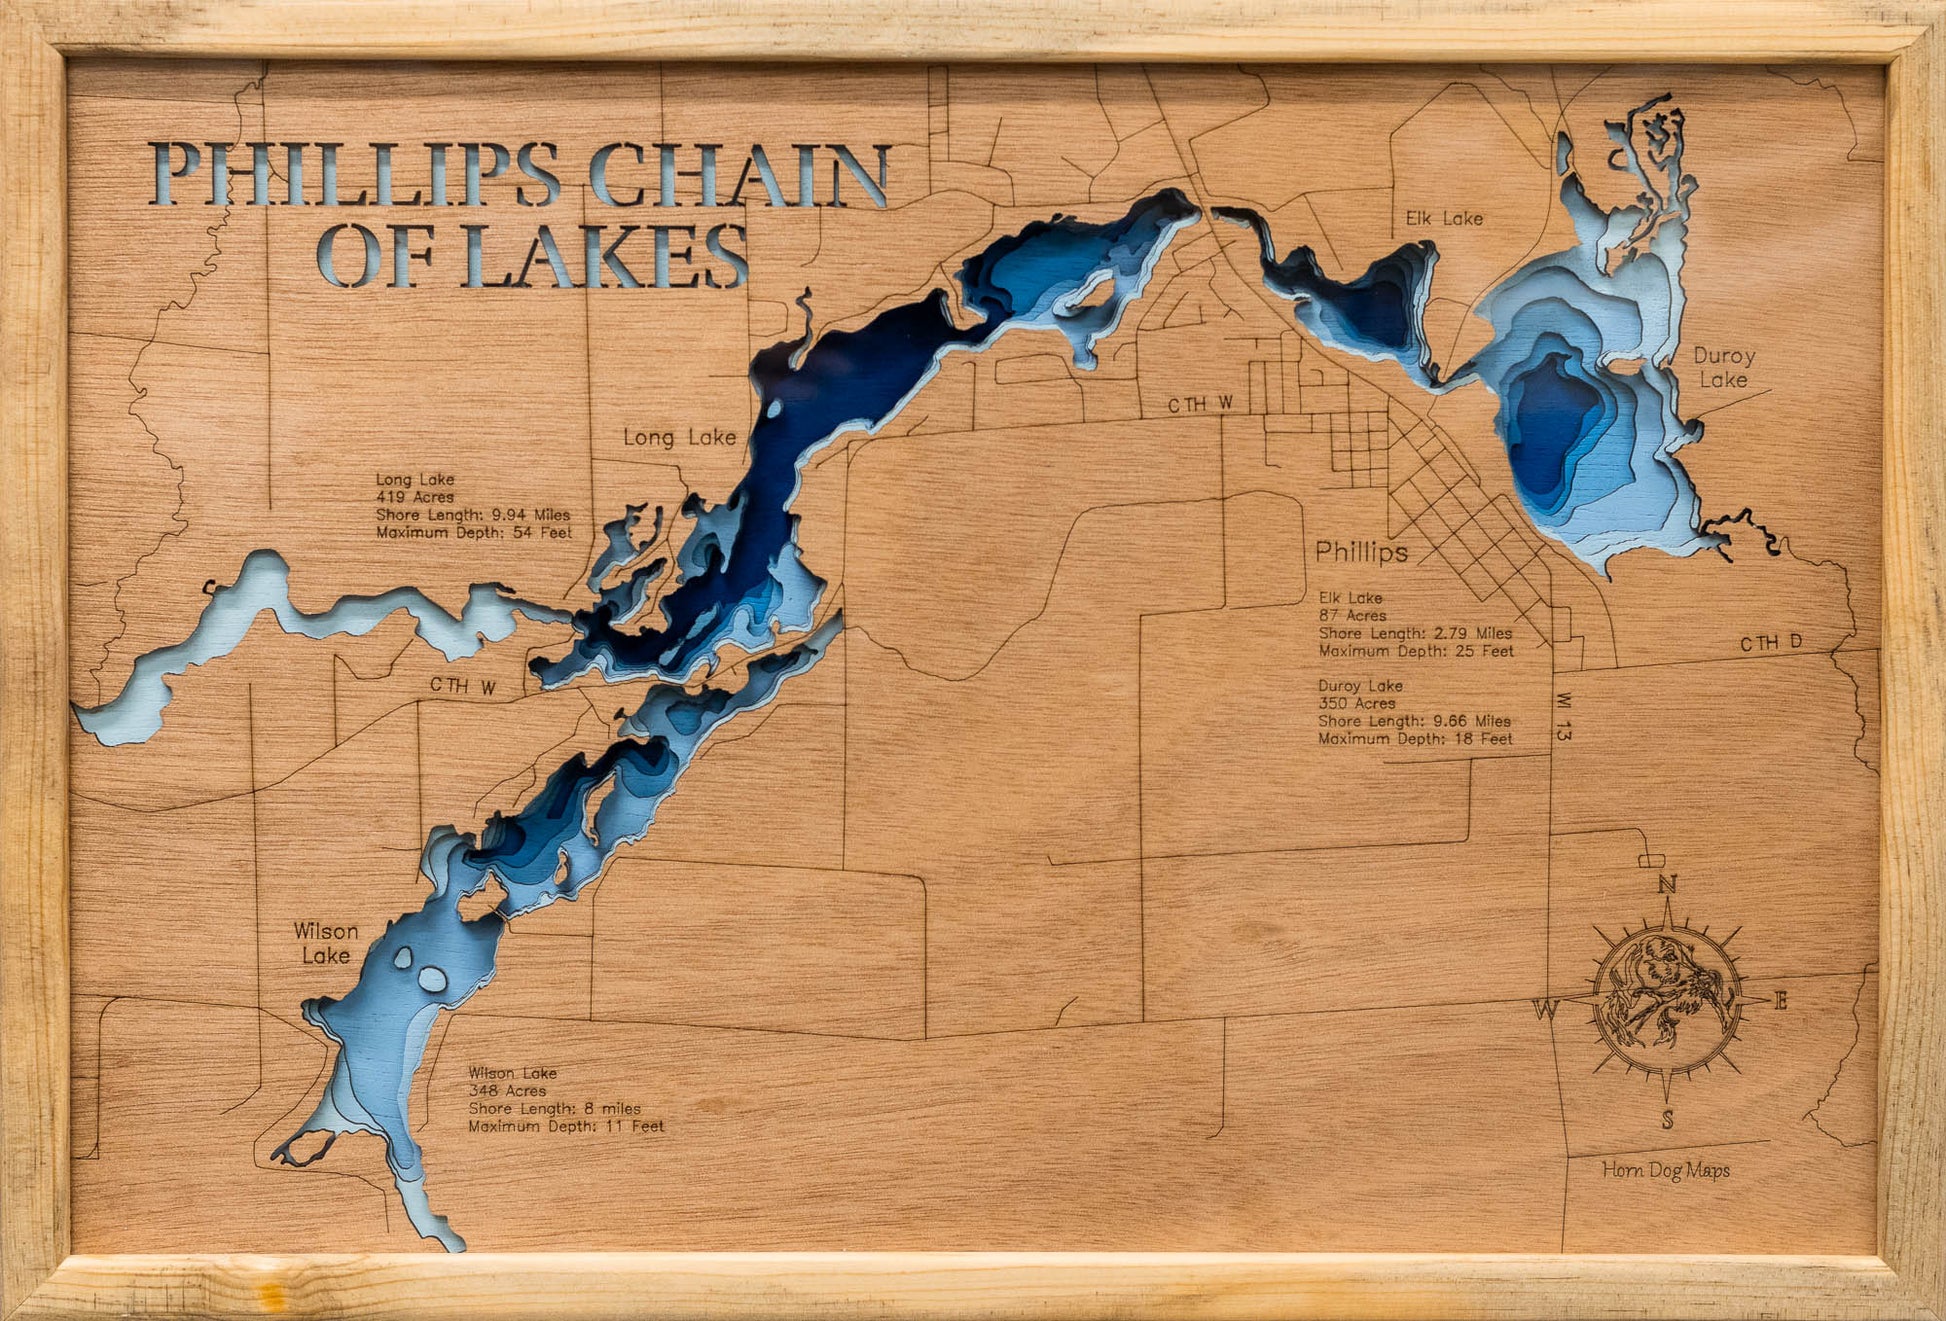 Phillips Chain of Lakes in Price County, WI